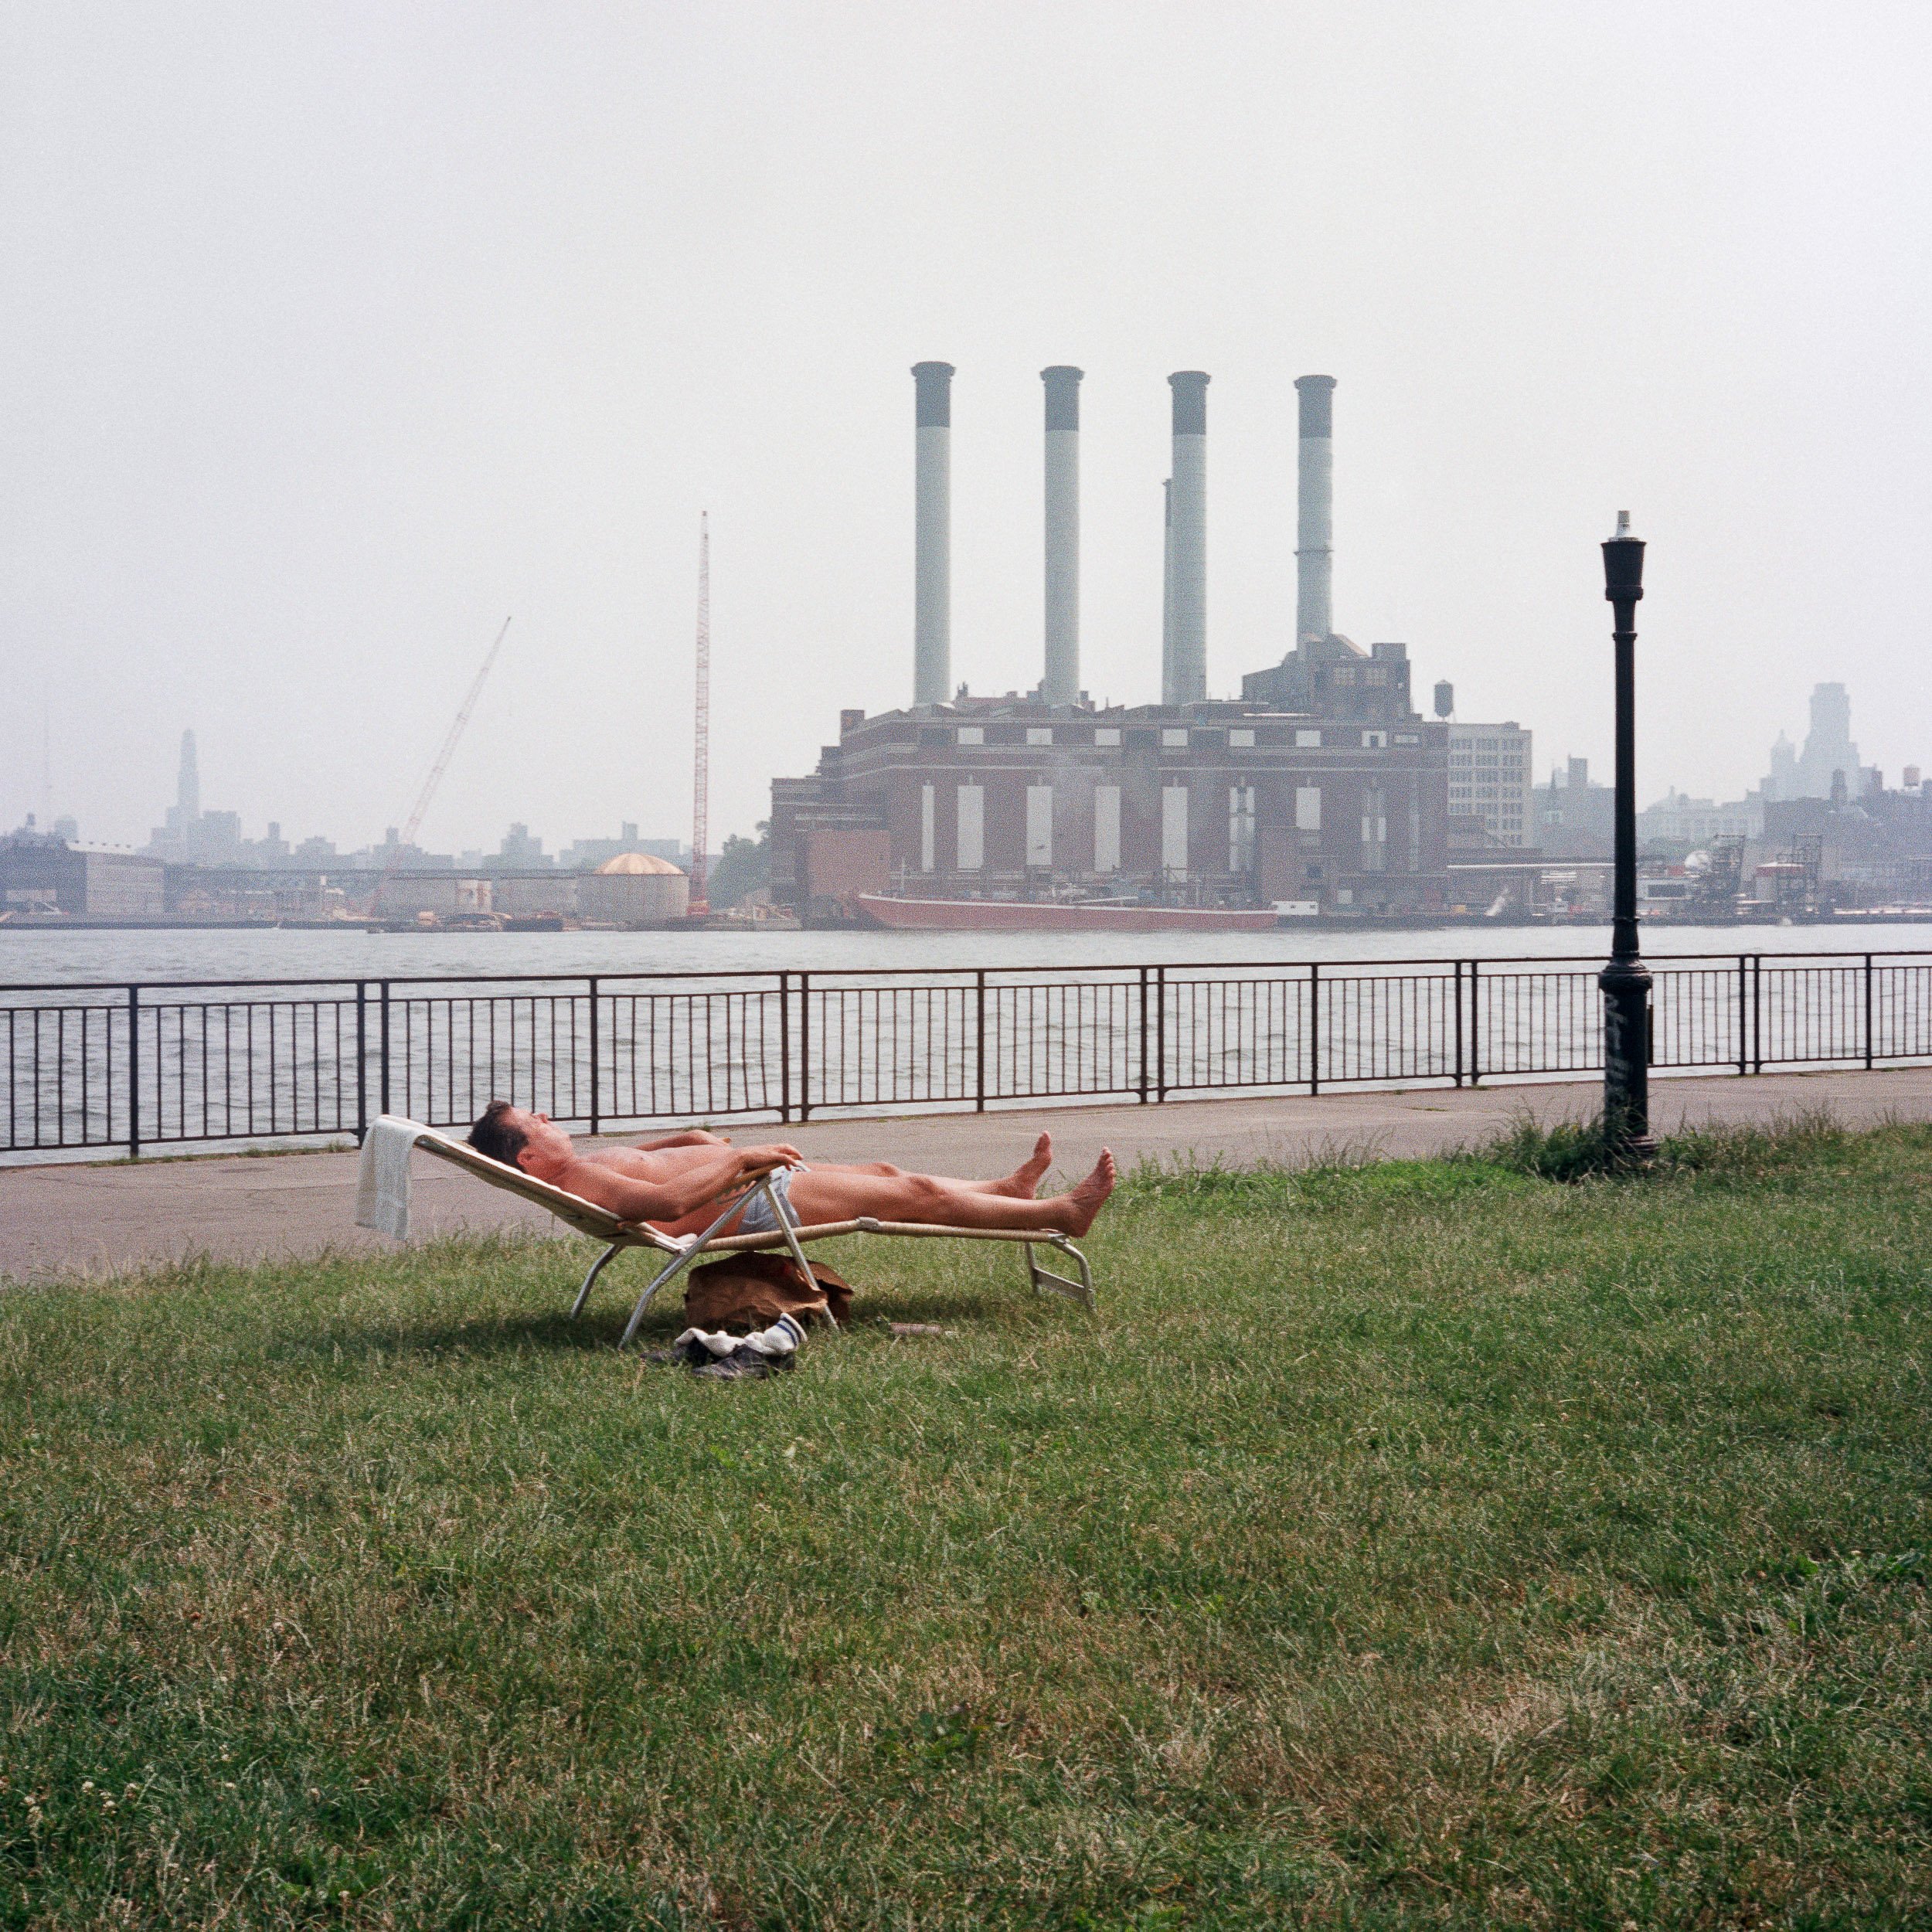   Sunbather on the East River, 1985  